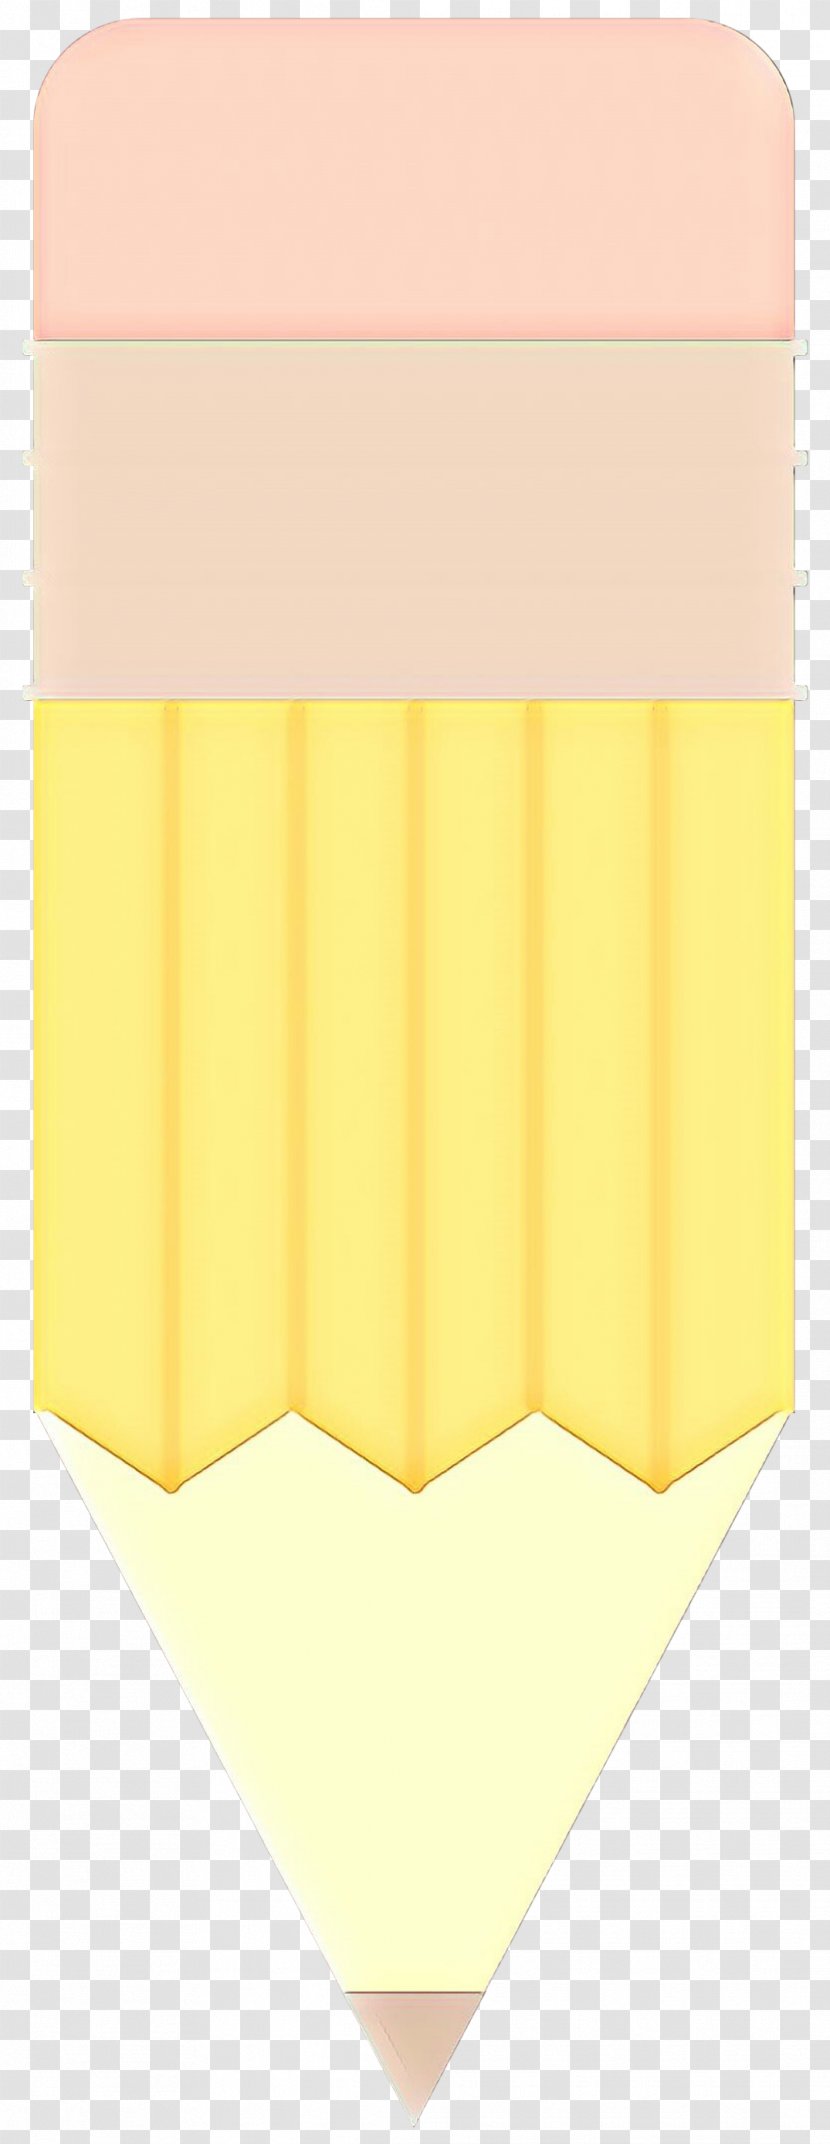 Yellow Beige Rectangle Paper Product - Cartoon Transparent PNG